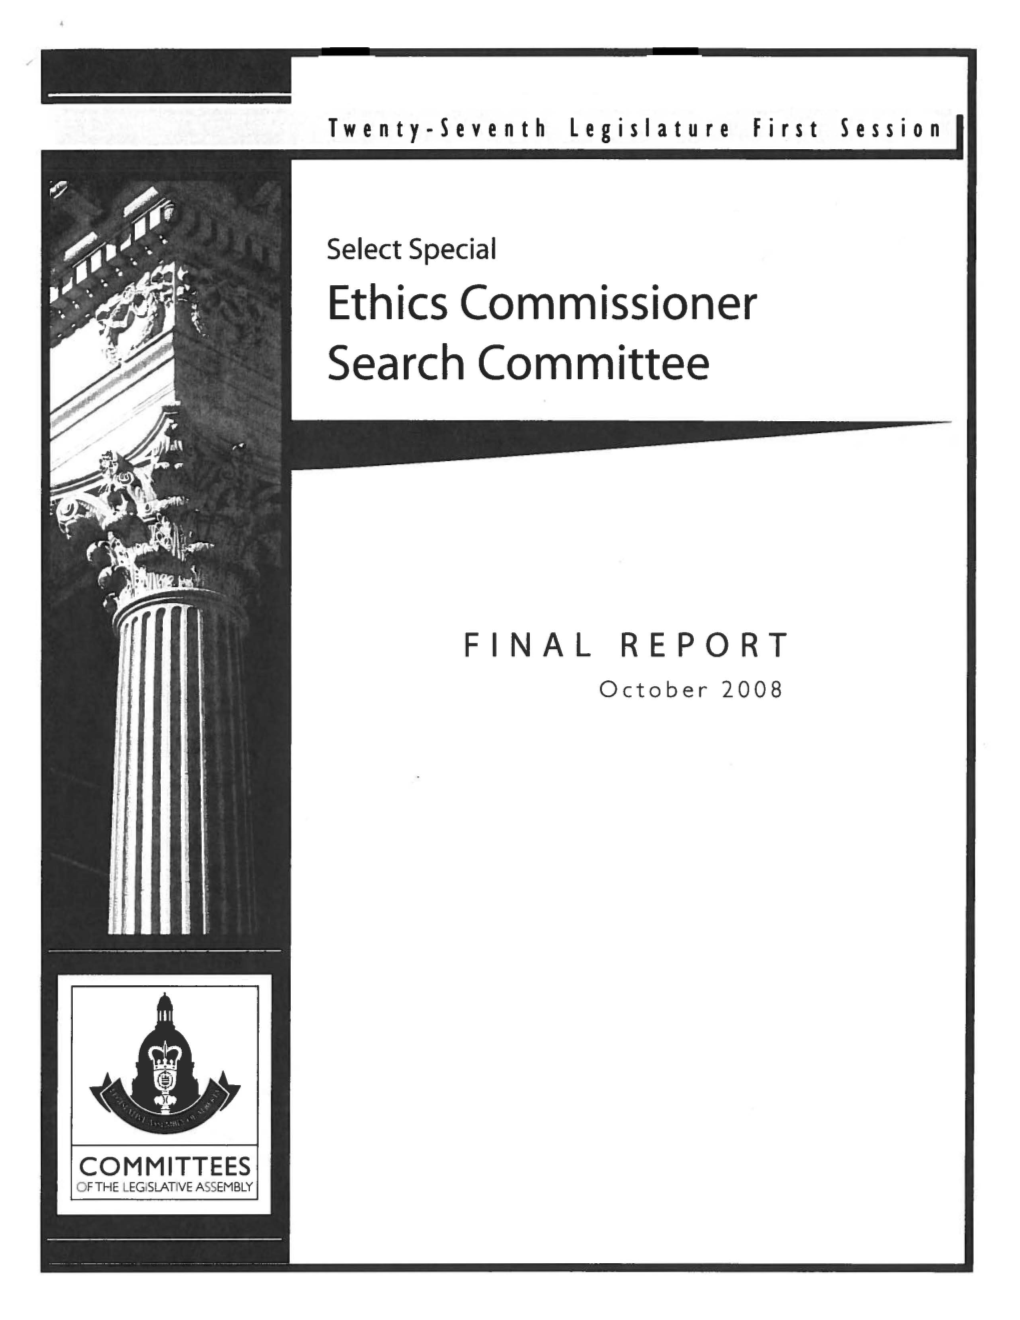 Ethics Commissioner Search Committee